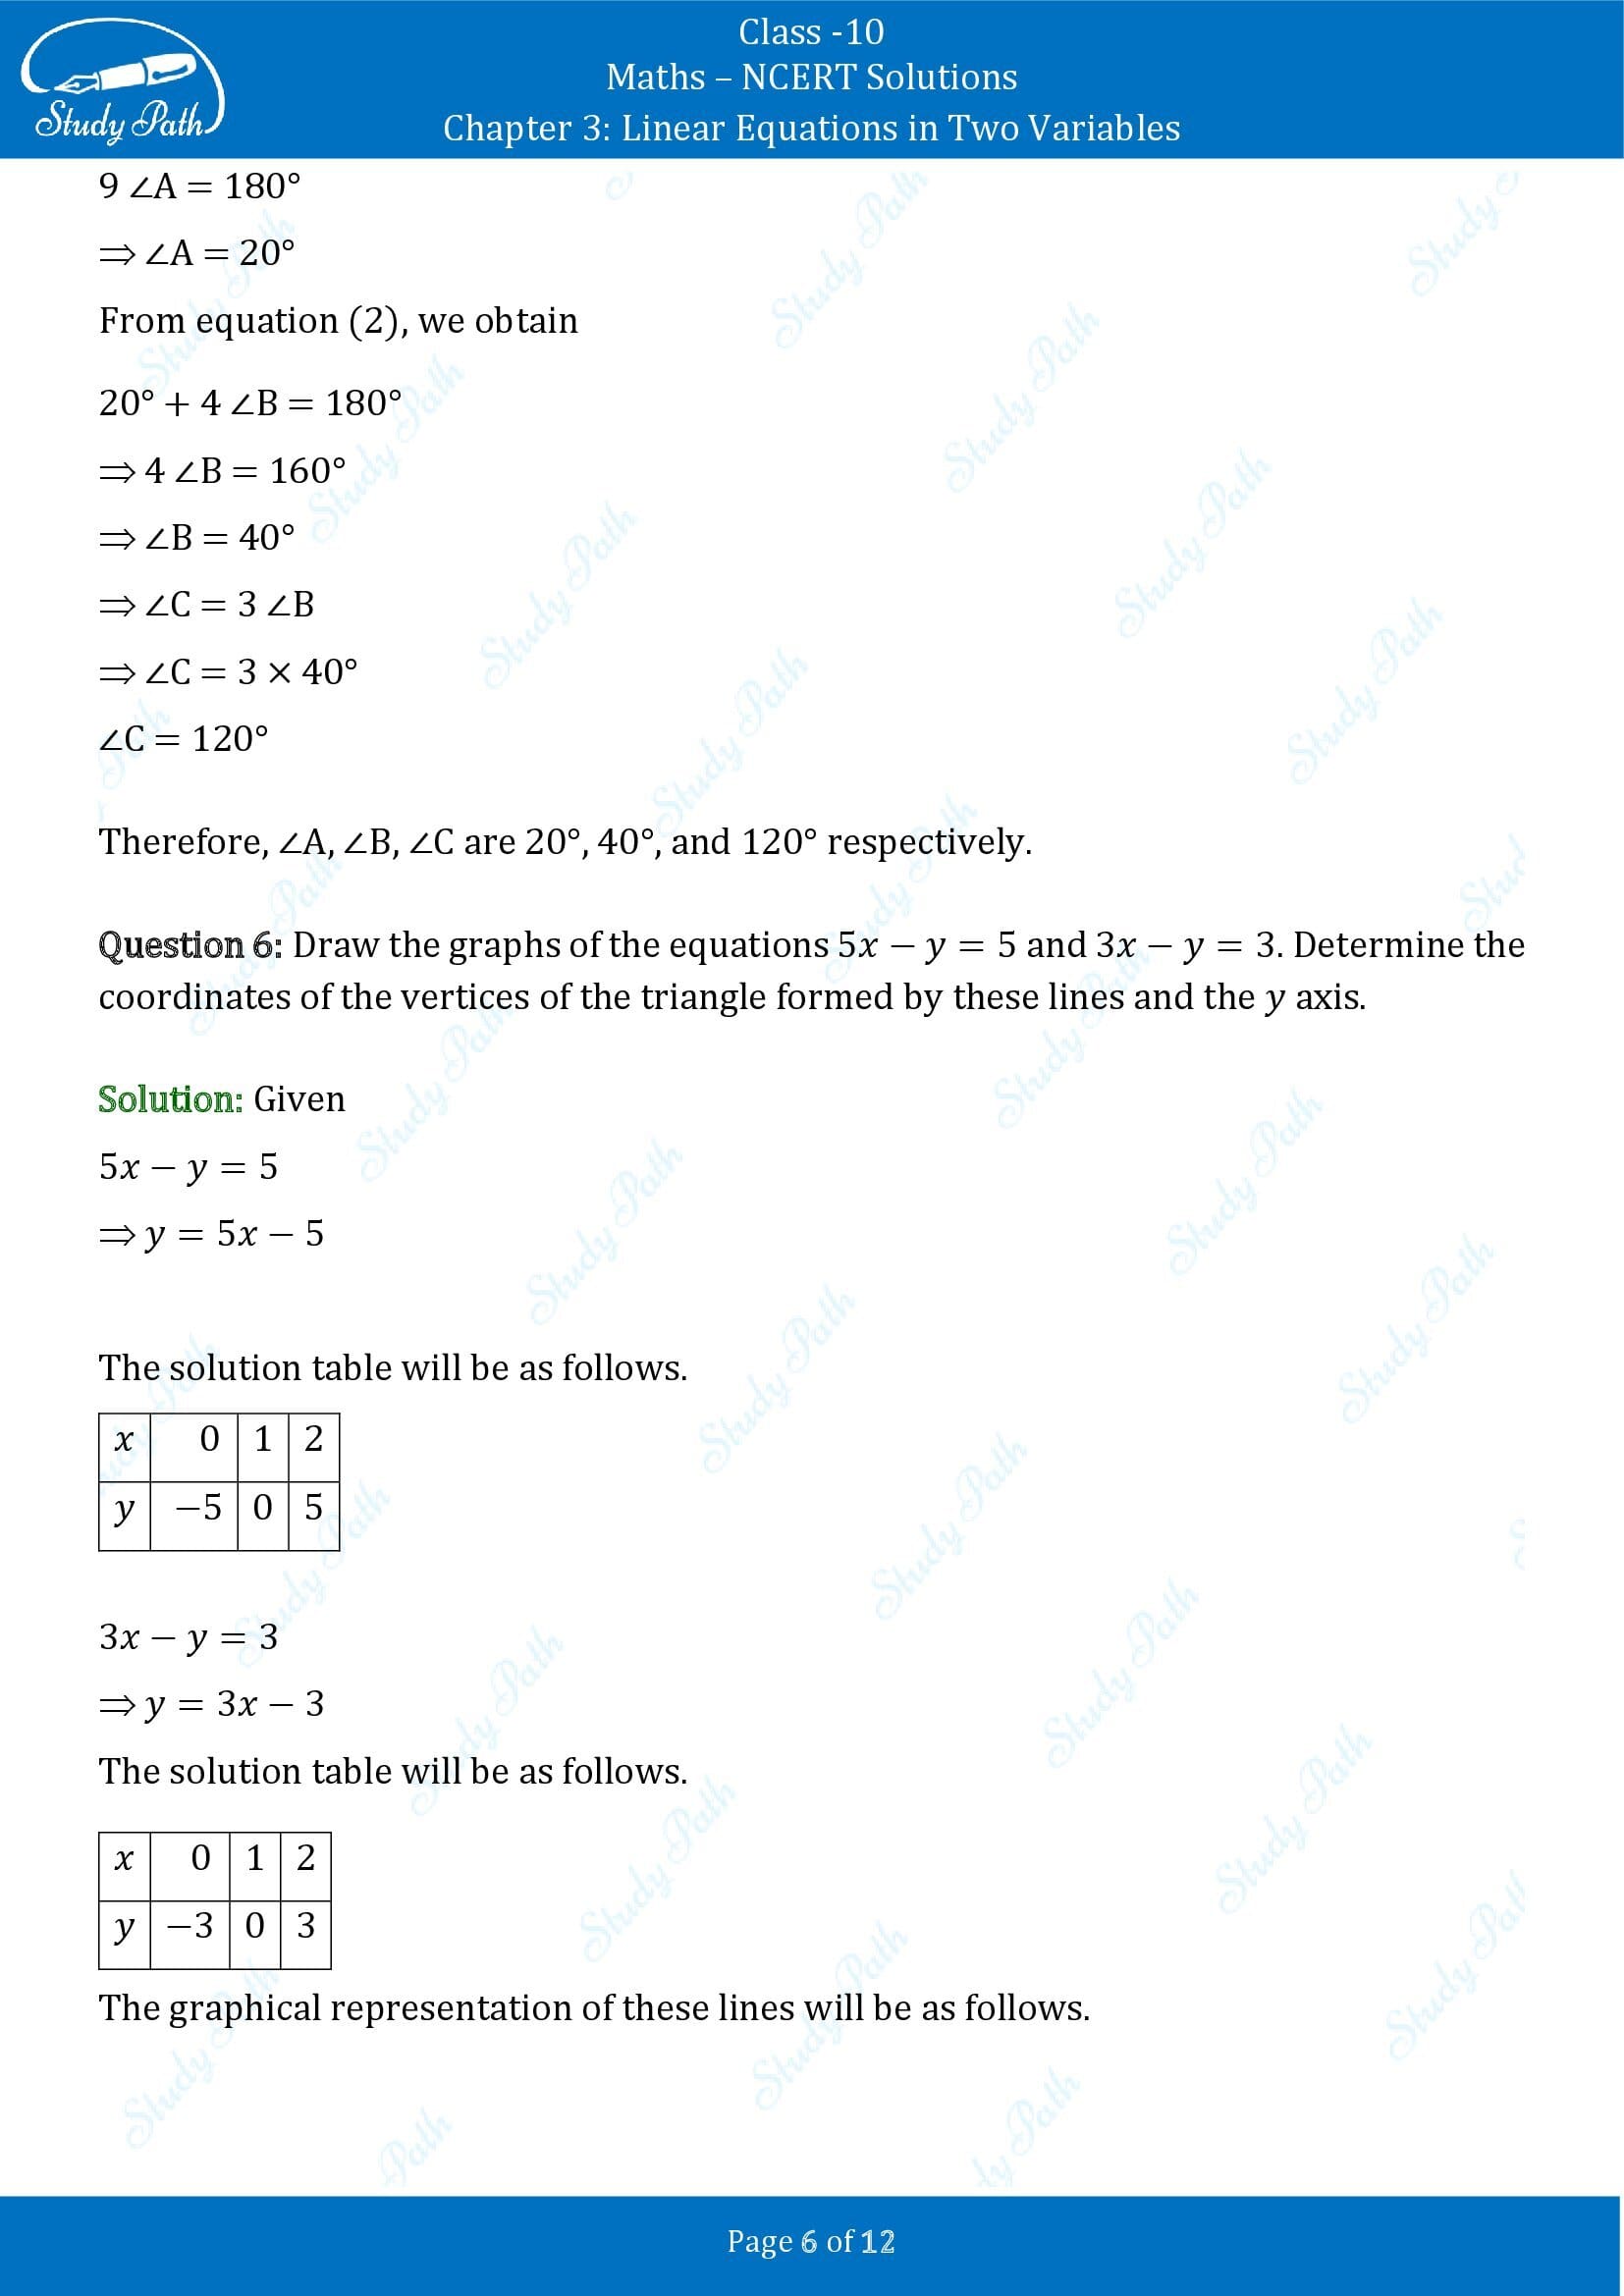 NCERT Solutions for Class 10 Maths Chapter 3 Linear Equations in Two Variables Exercise 3.7 00006